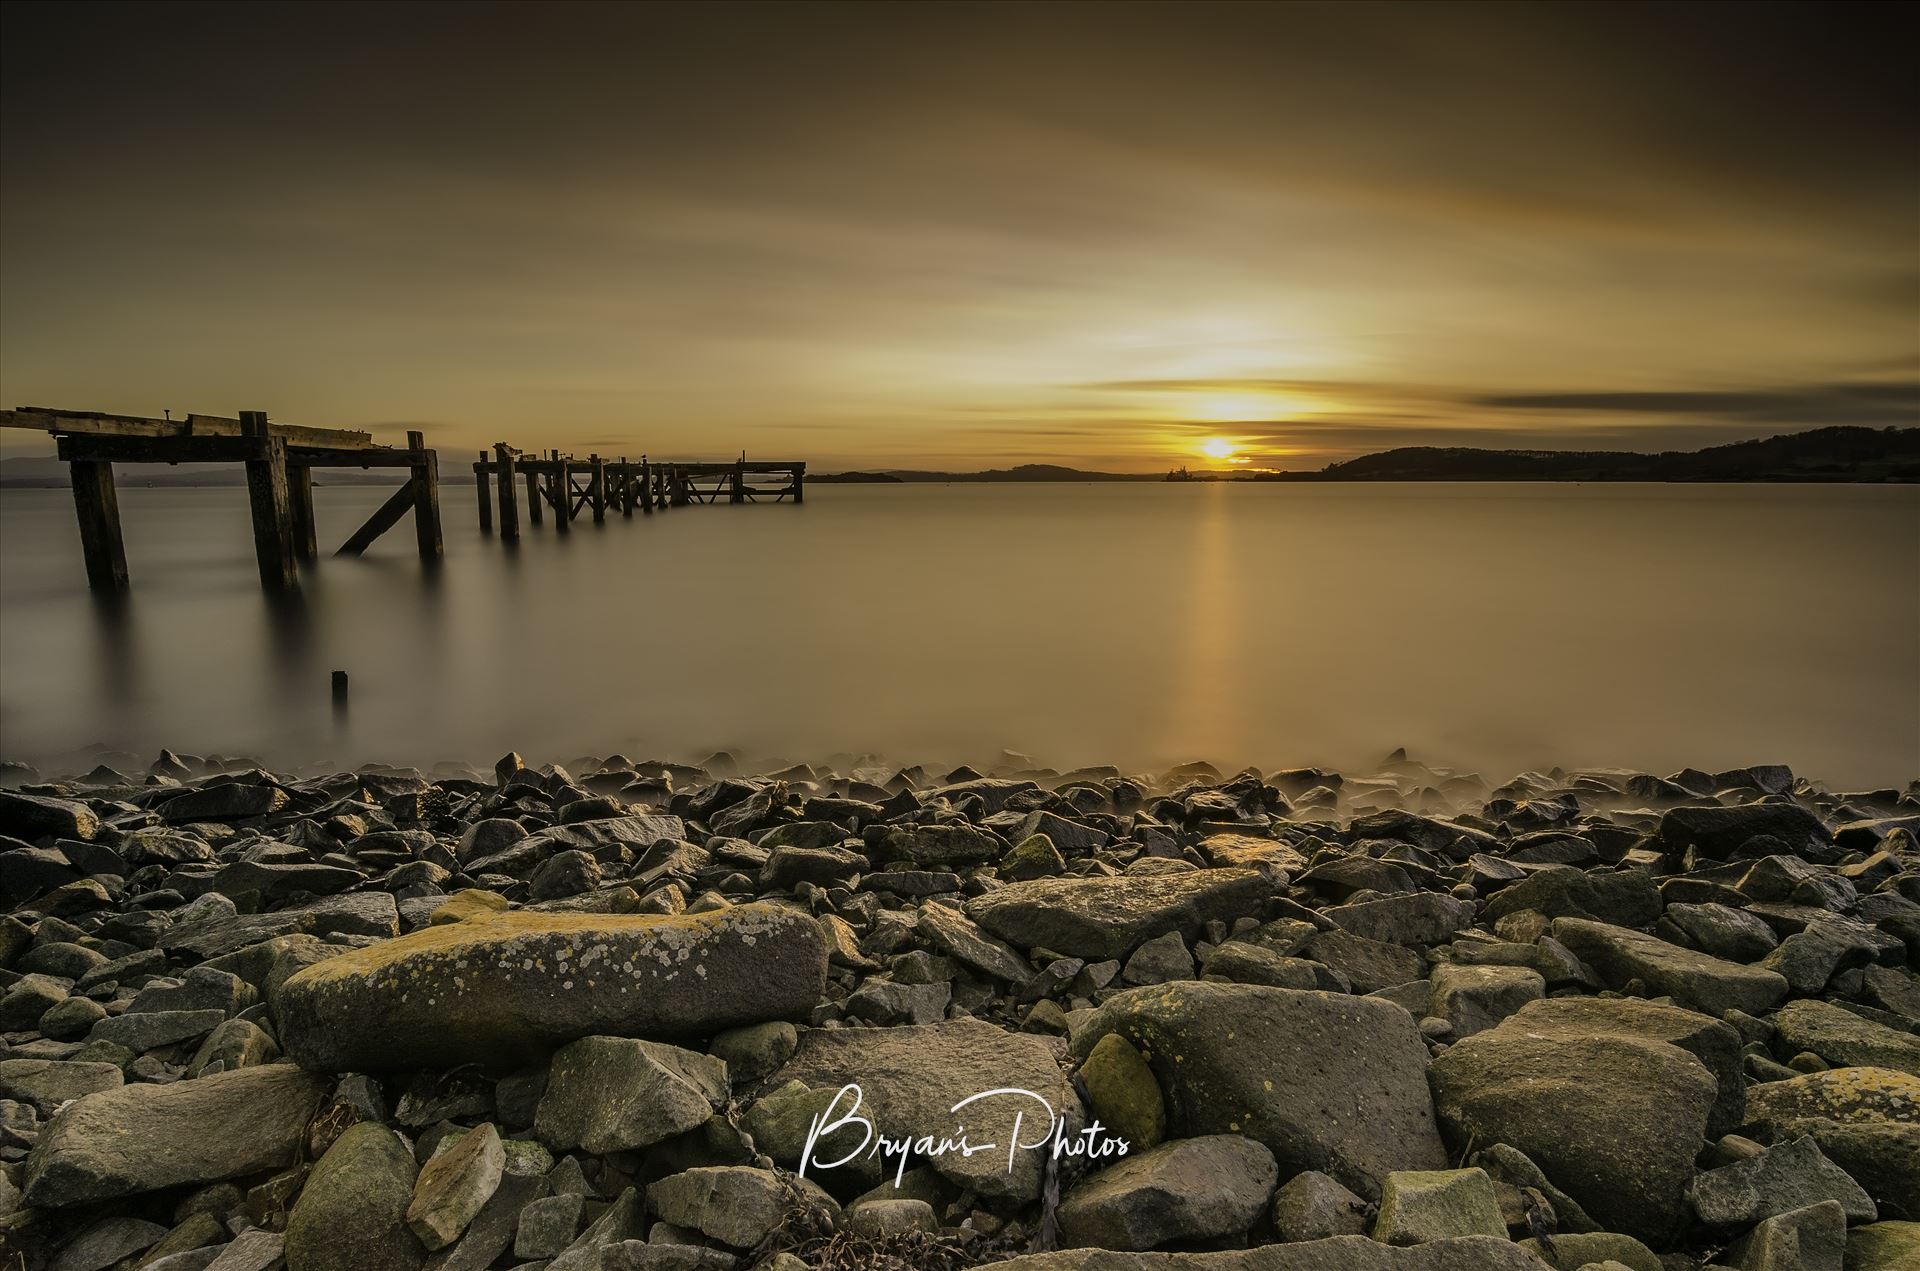 Sunset at Hawkcraig A long exposure photograph of the abandoned  Hawkcraig pier at Aberdour taken at sunset. by Bryans Photos